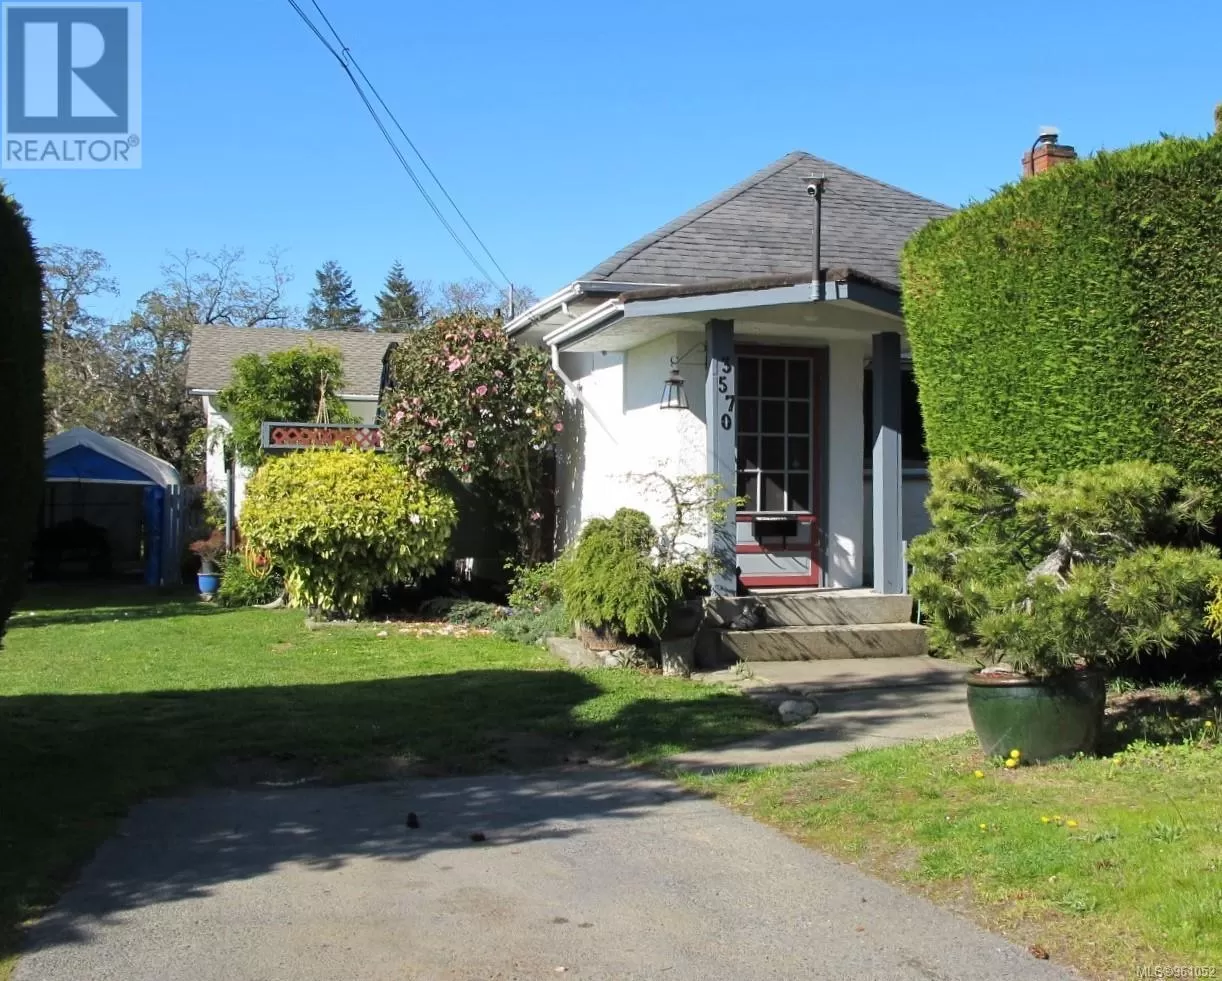 House for rent: 3570 Calumet Ave, Saanich, British Columbia V8X 1V5